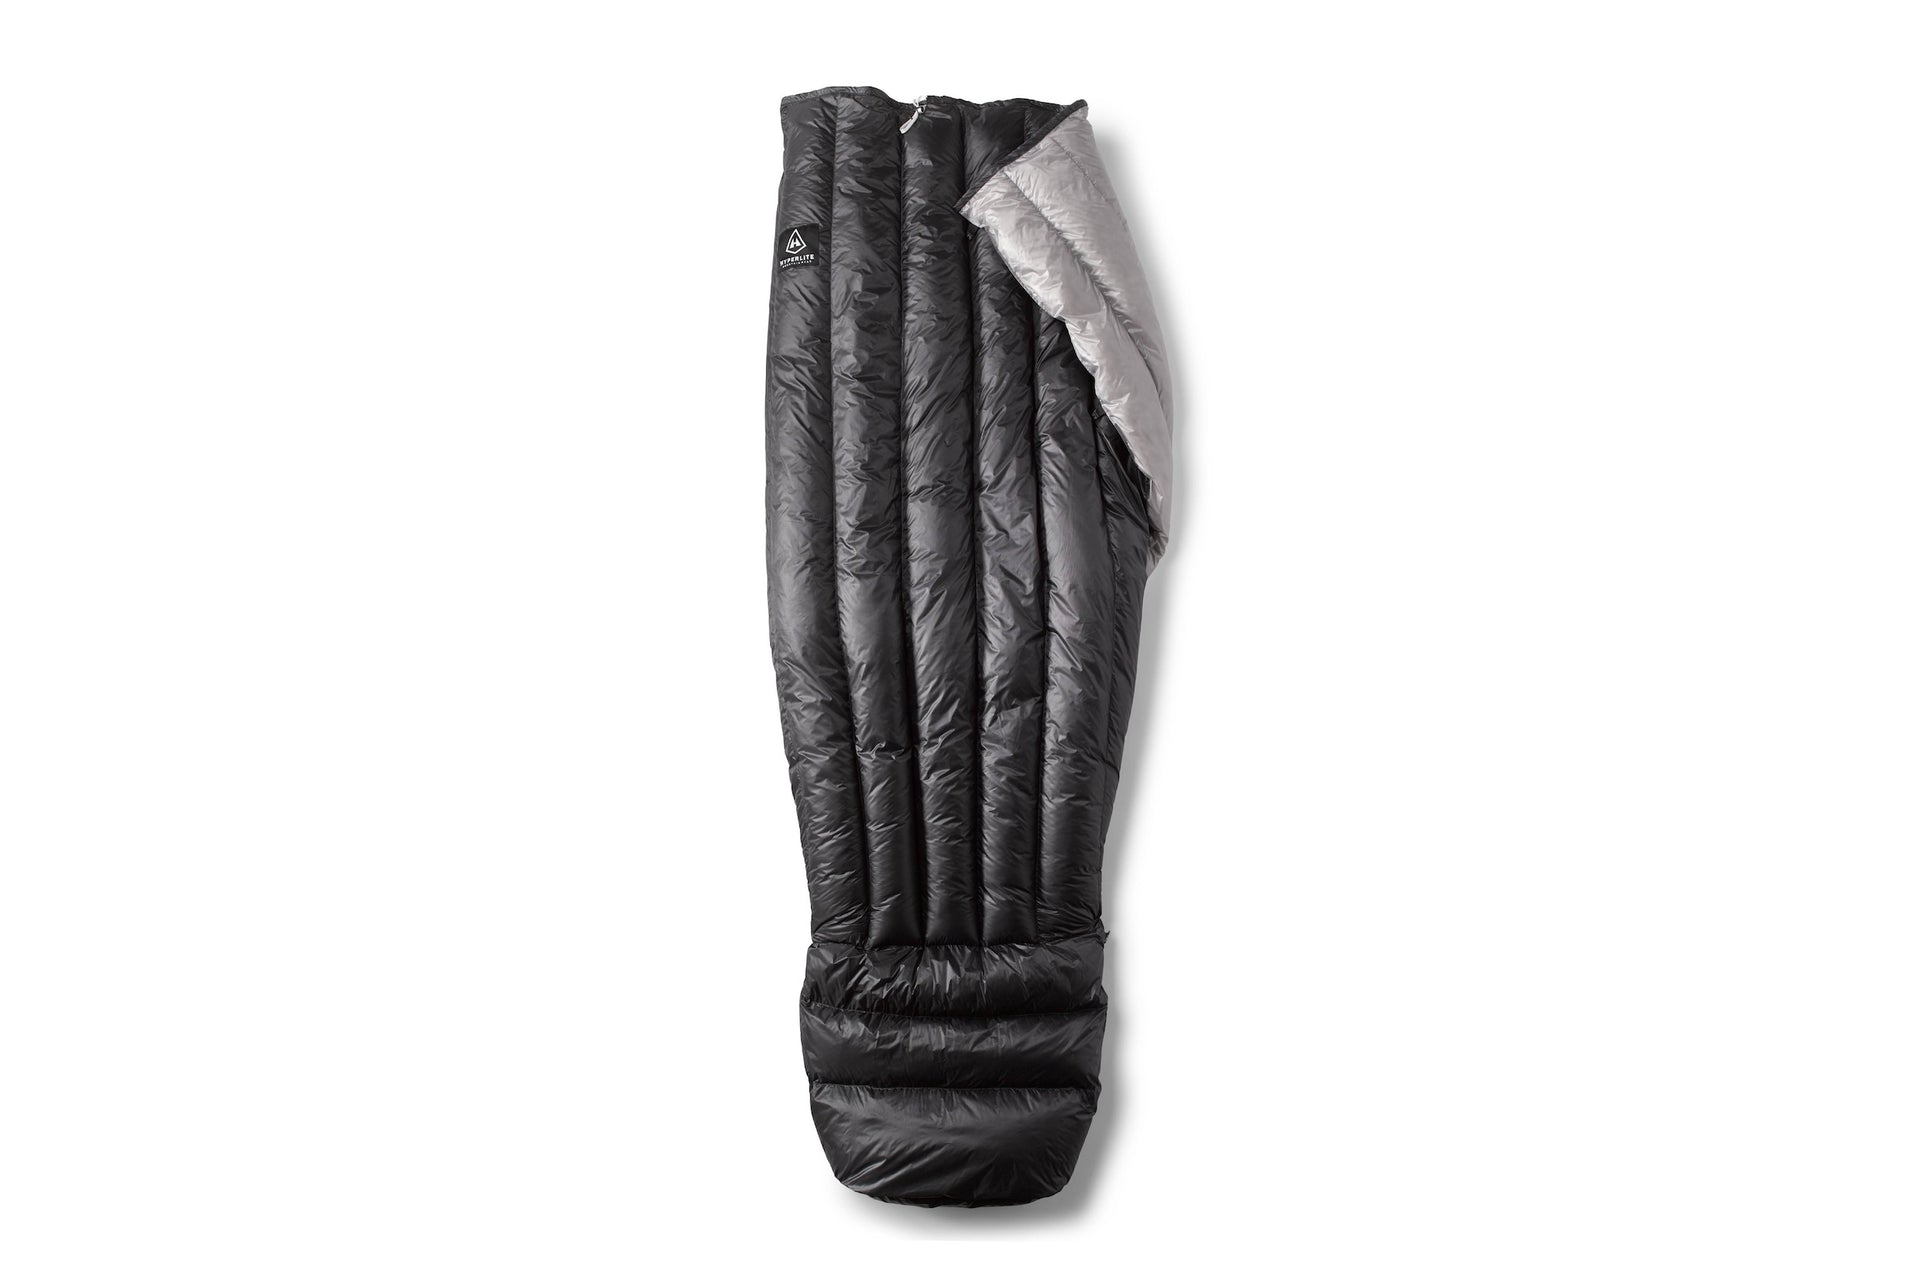 A black sleeping bag on a white background.